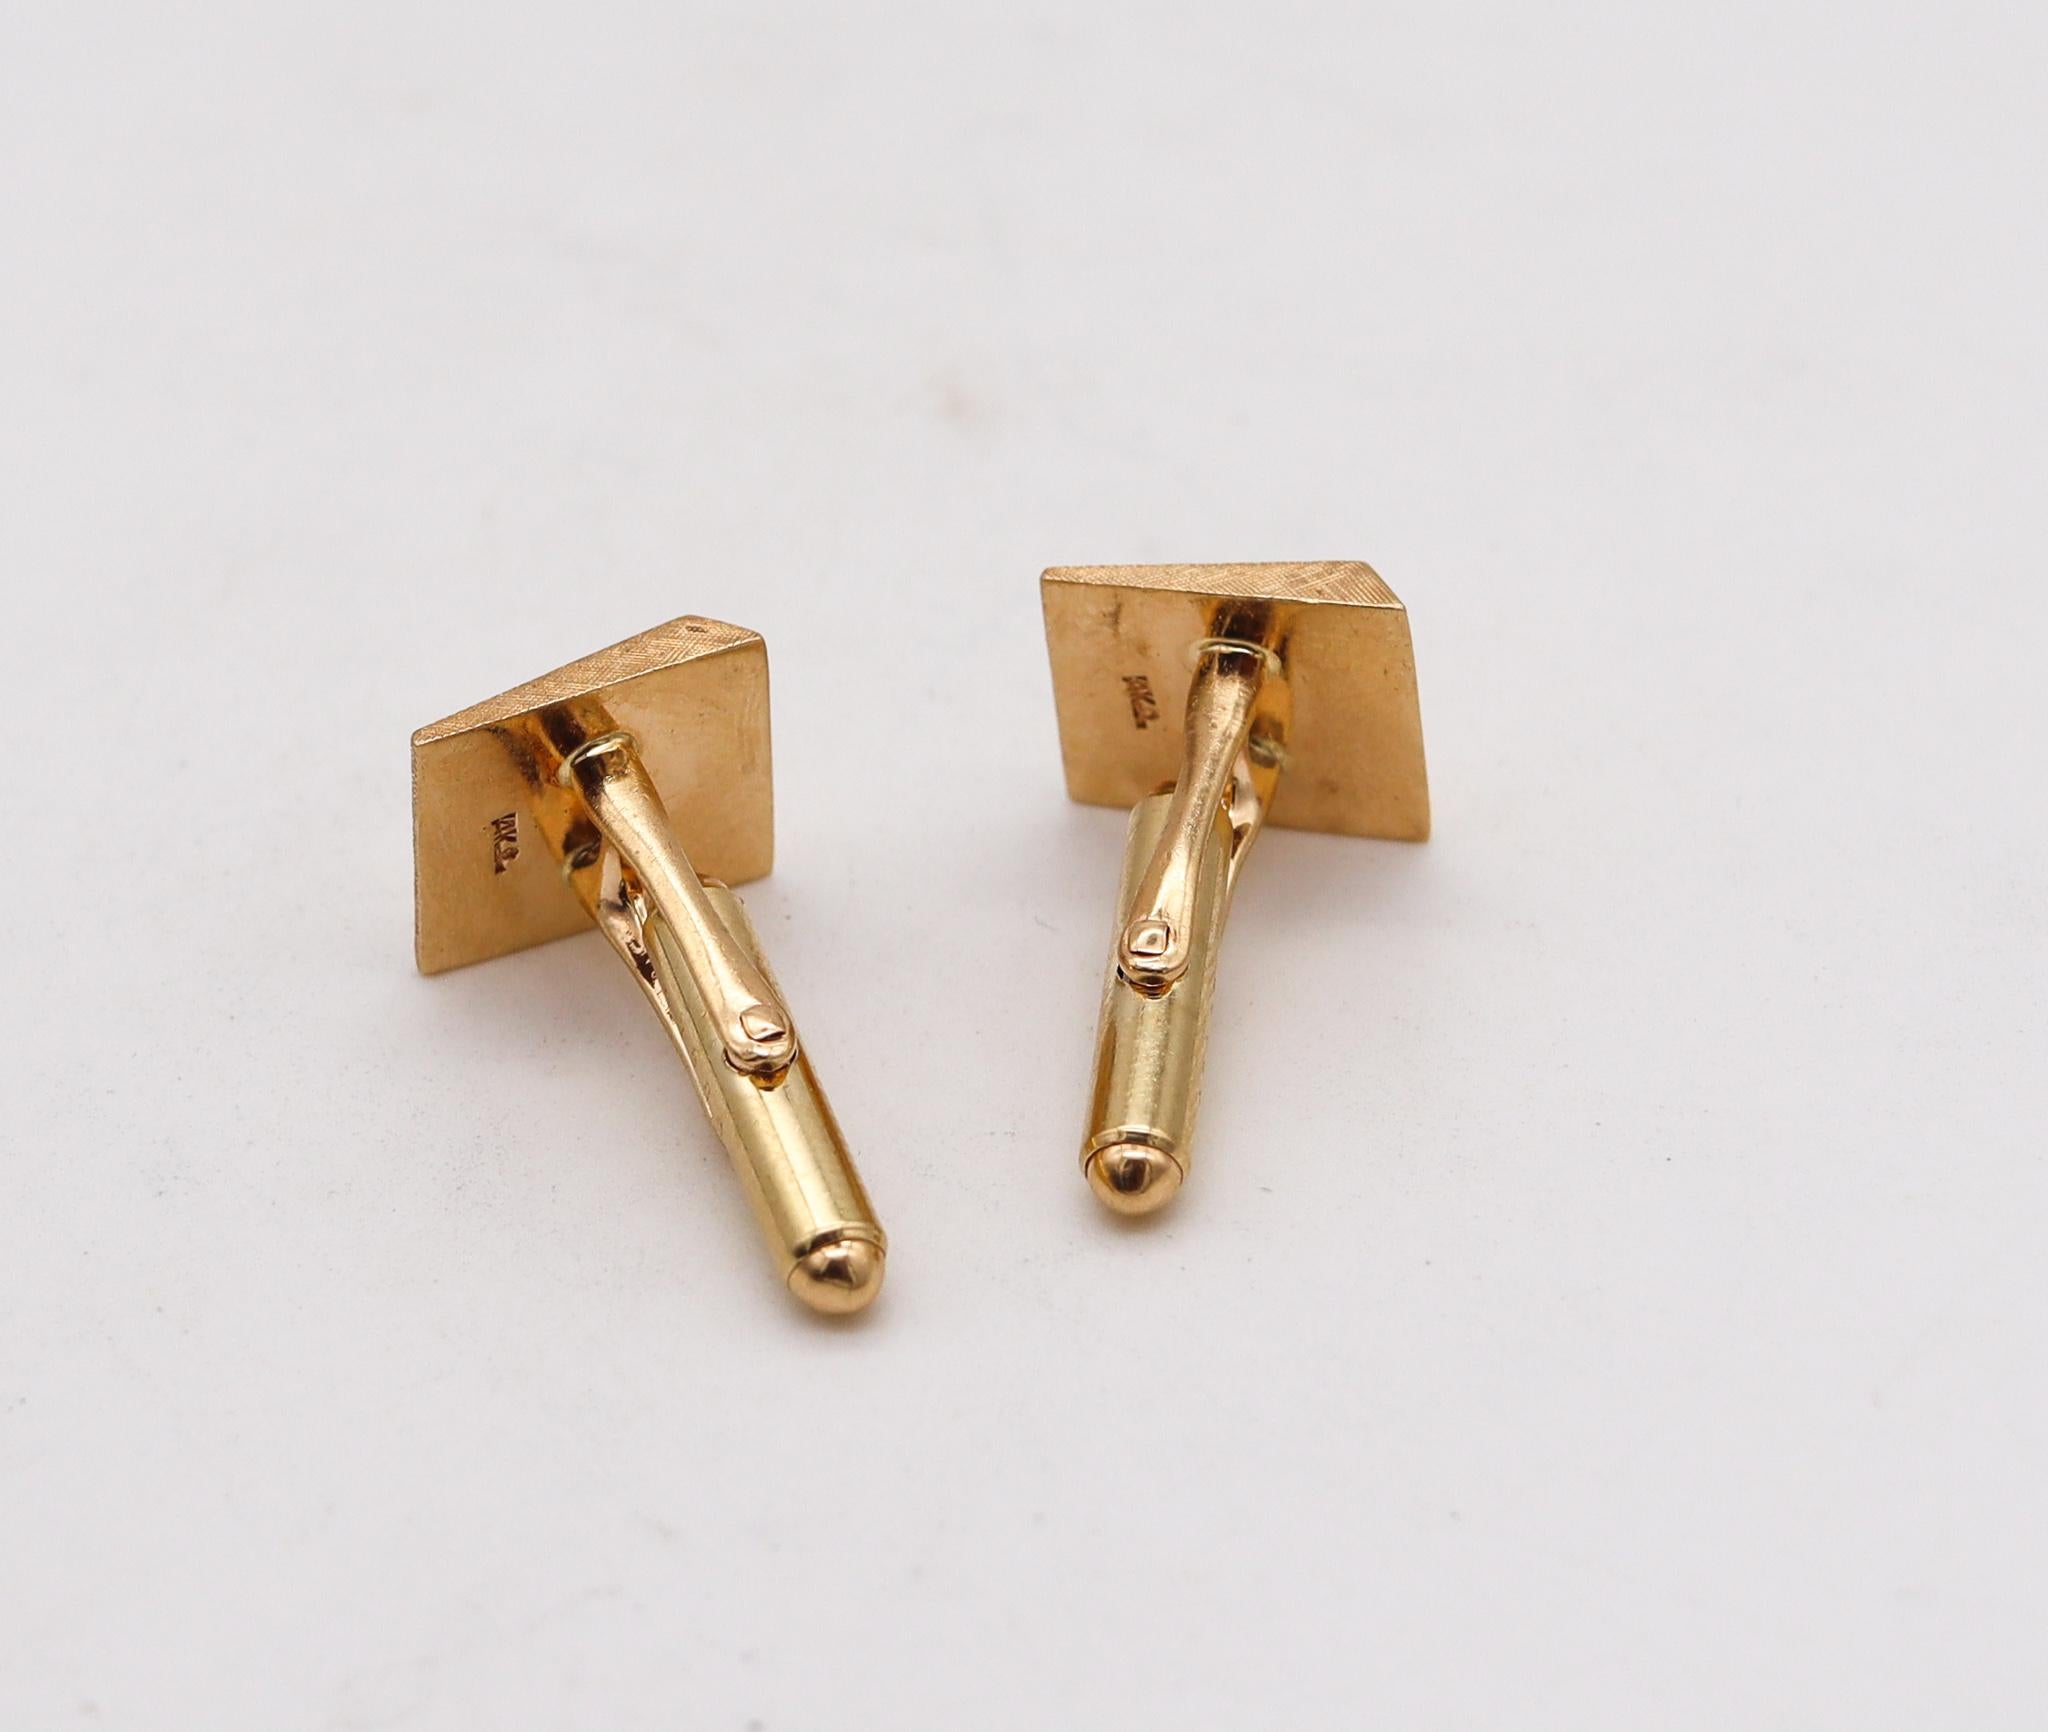 Women's or Men's Cartier 1970 Retro Modernist Geometric Pair of Cufflinks in Brushed 14kt Gold For Sale